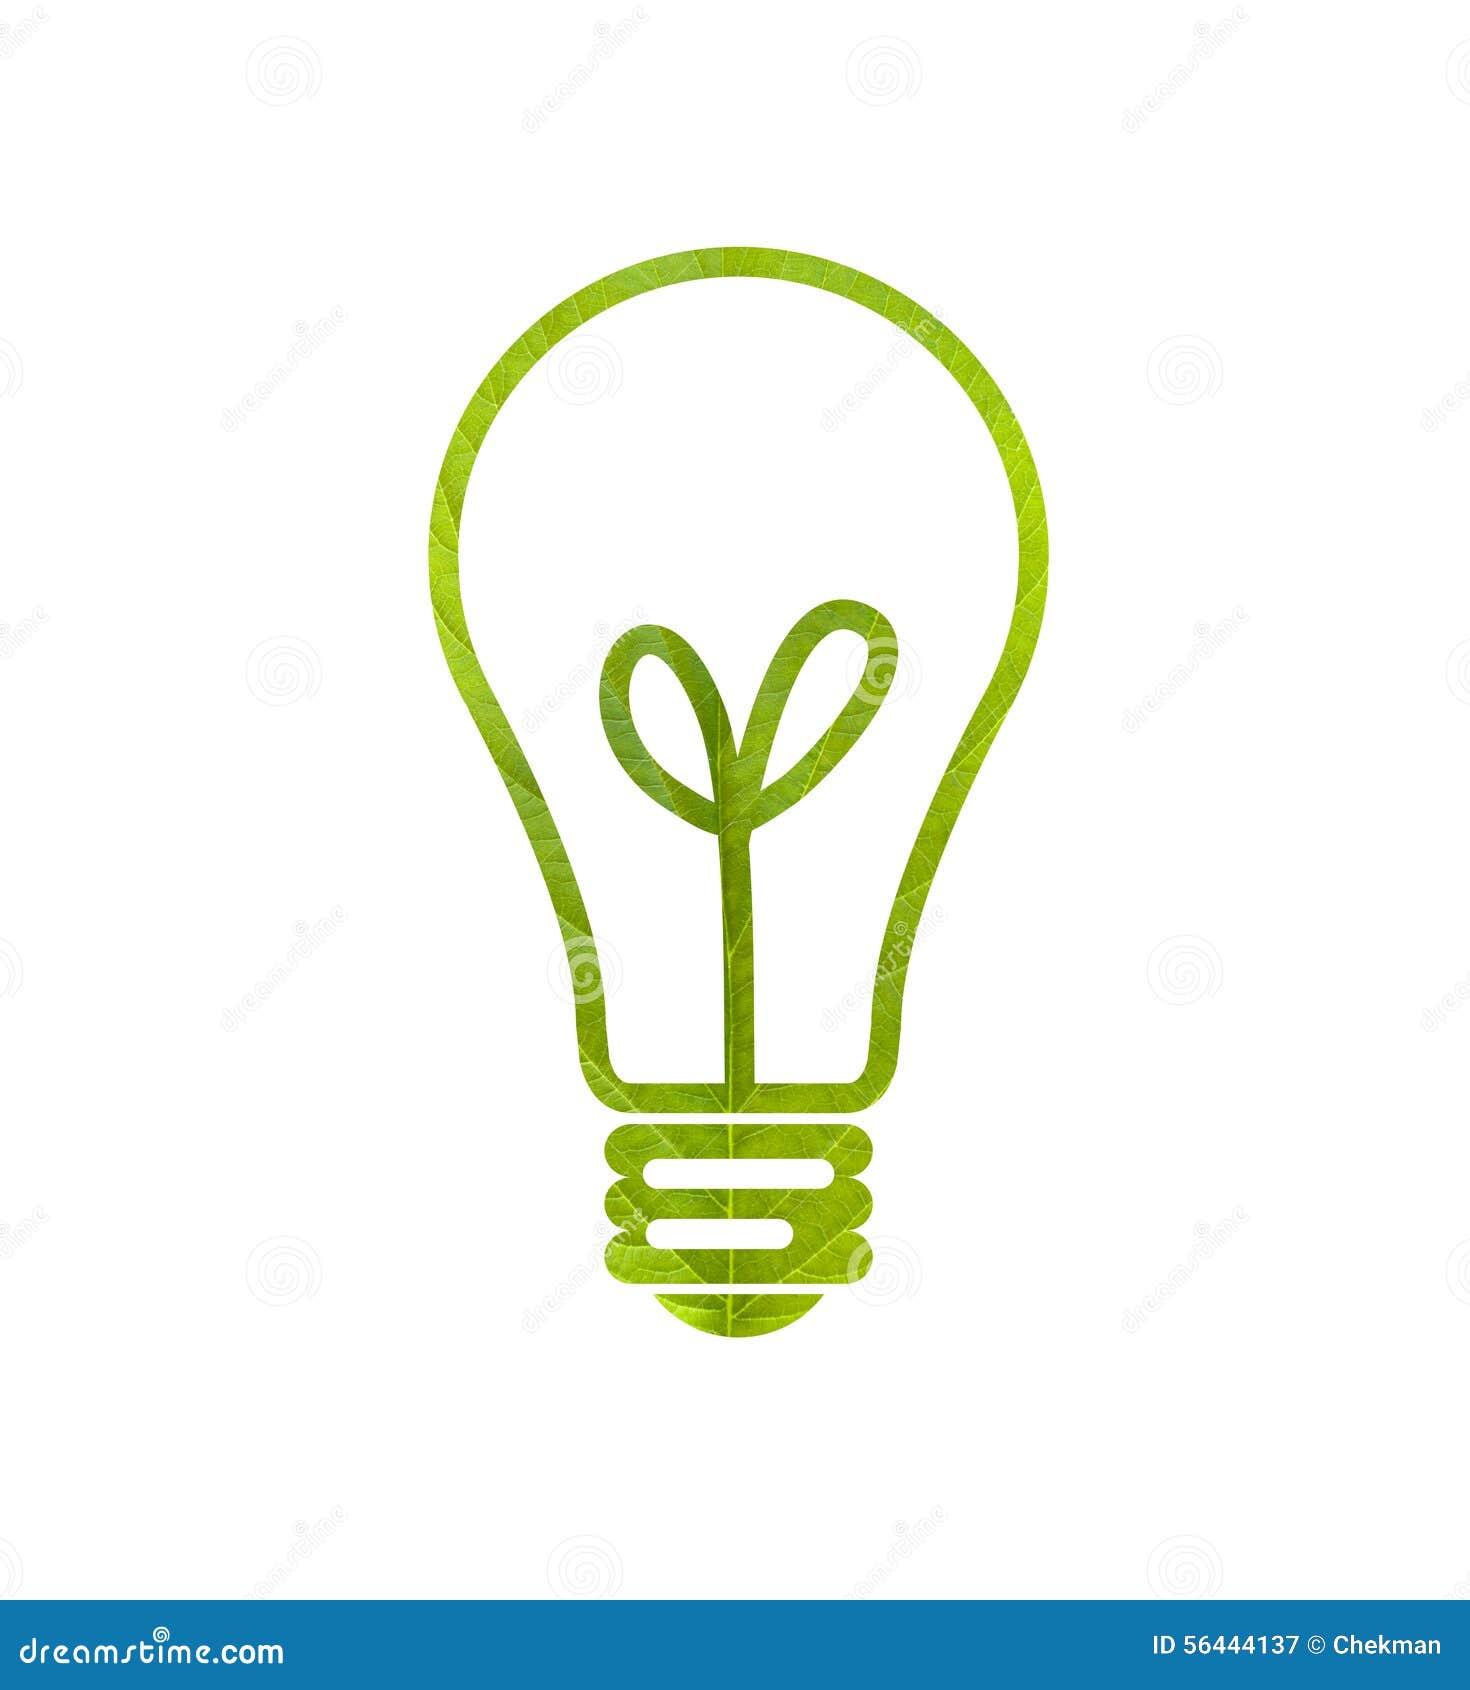 10,162 Leaf Light Bulb Stock - & Royalty-Free Stock Photos from Dreamstime